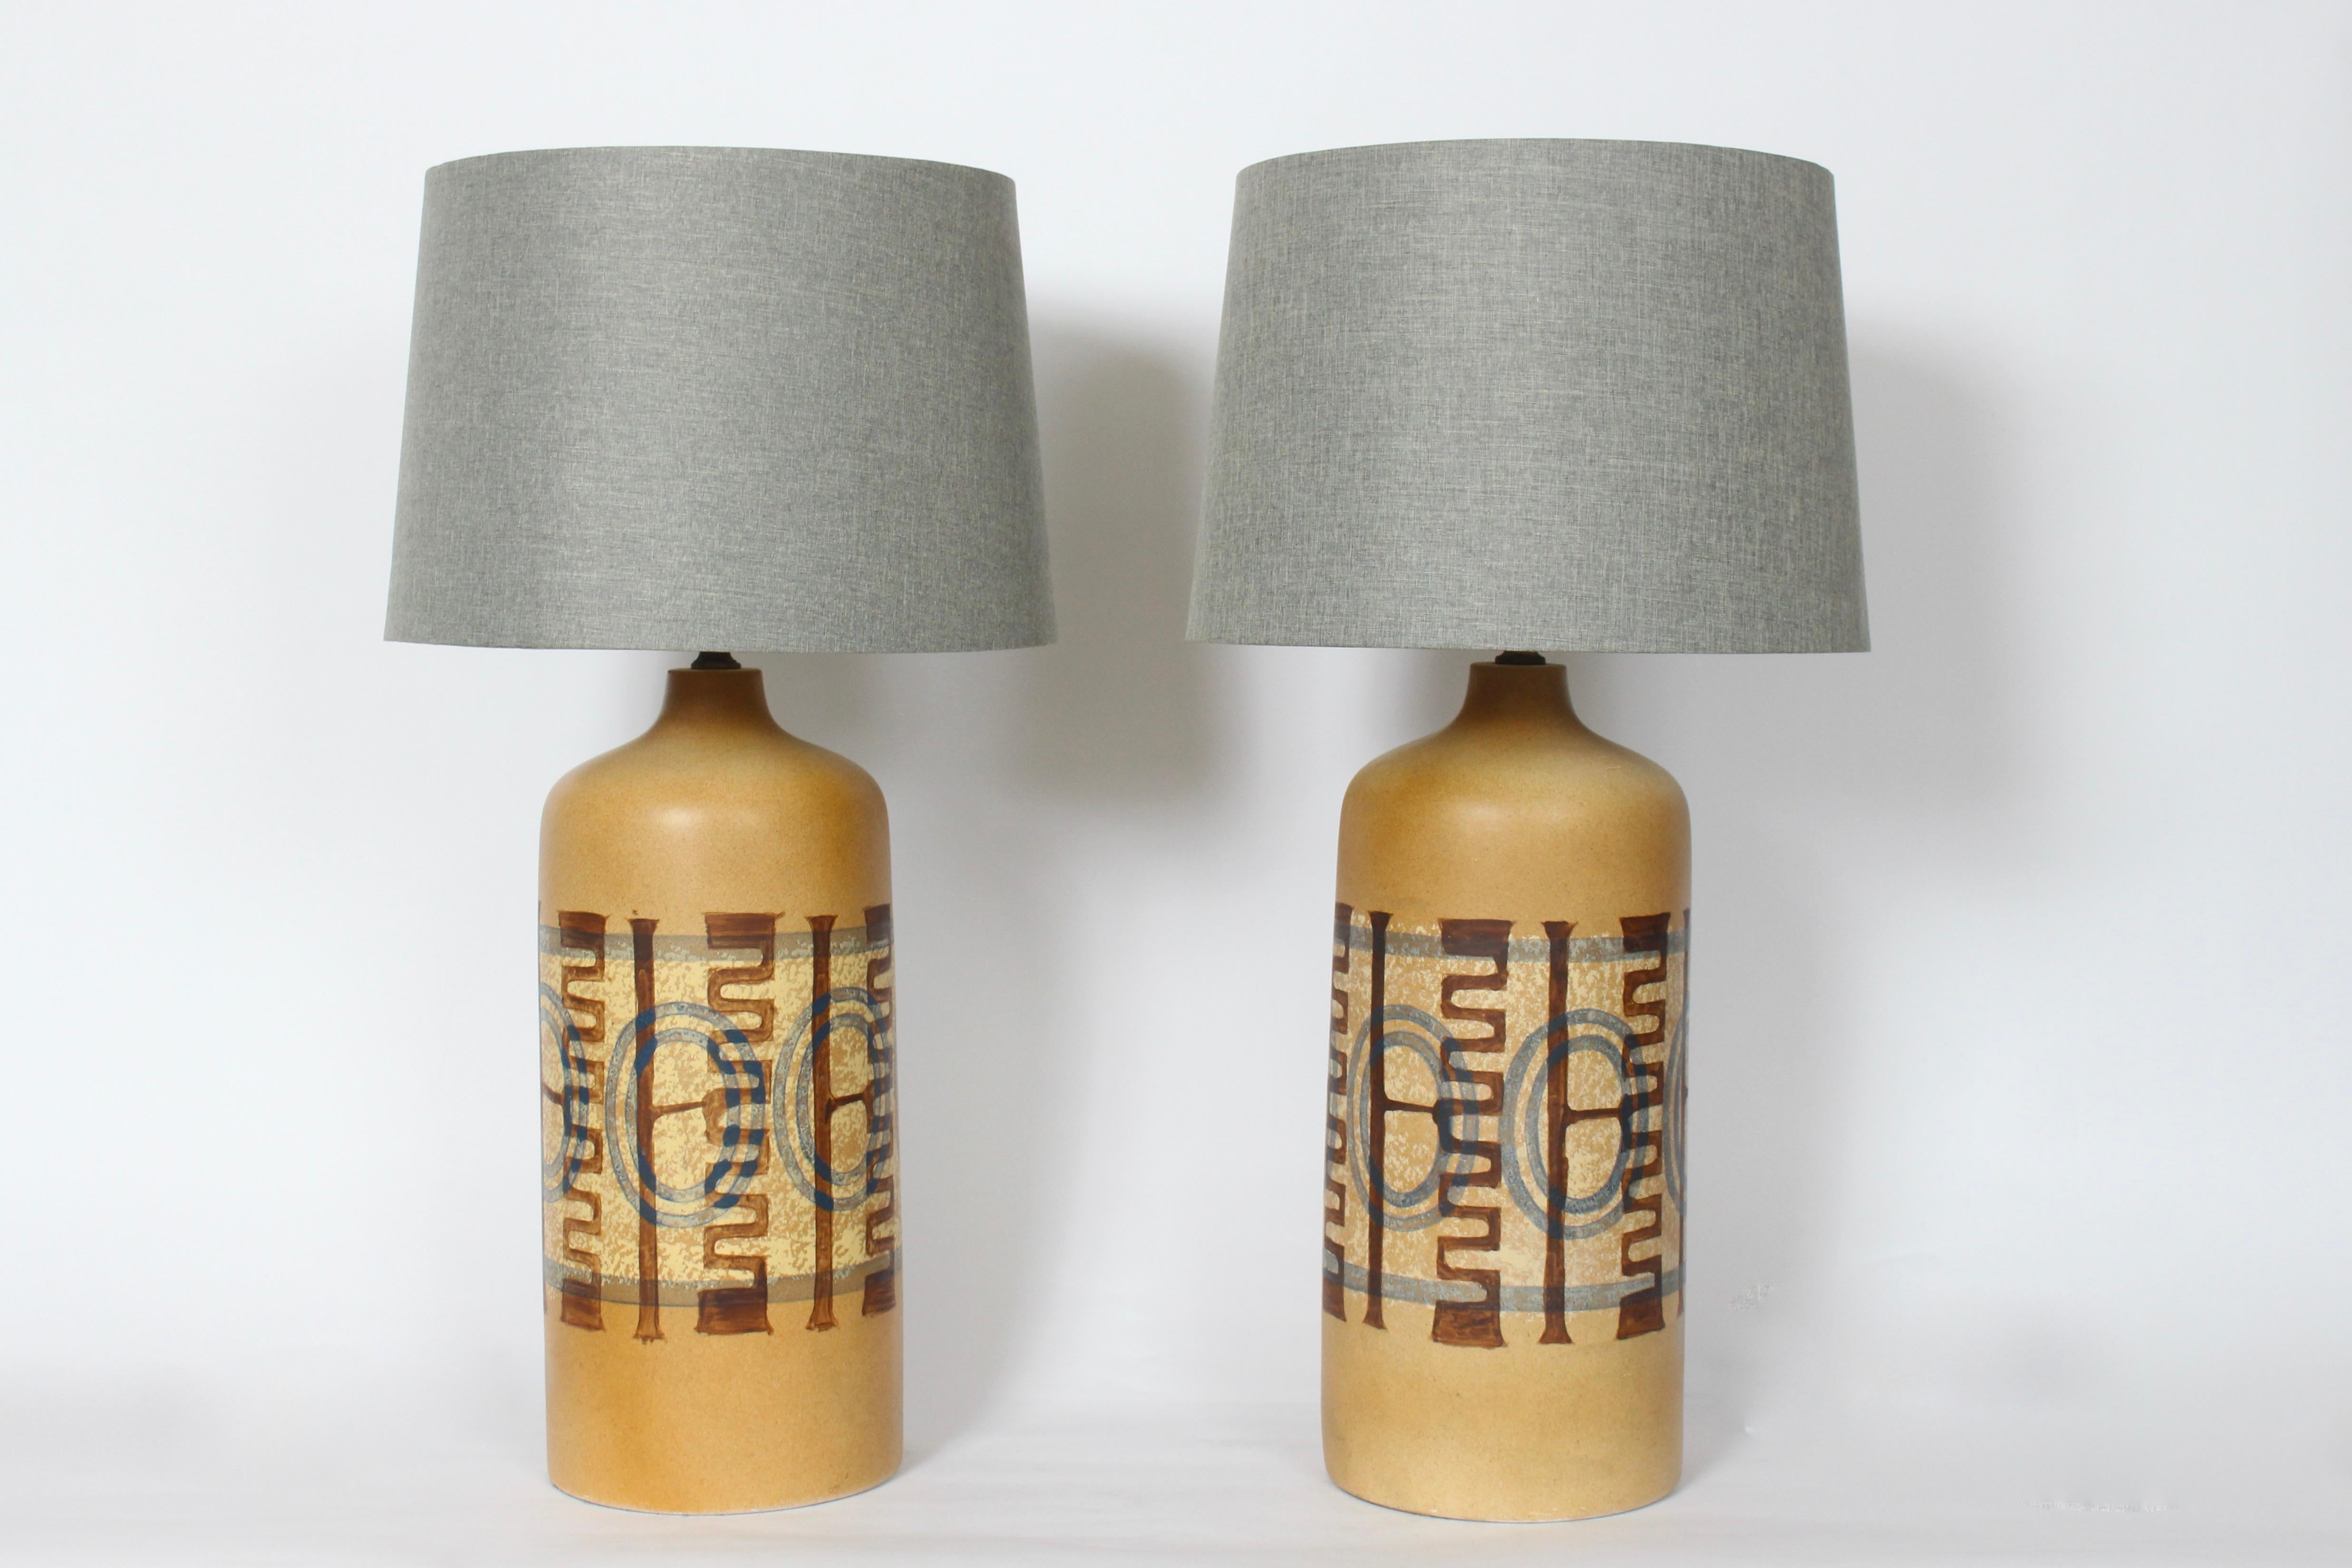 Pair Elspeth Cohen for Lapid Pottery Patterned Mustard Table Lamps, 1960s For Sale 8